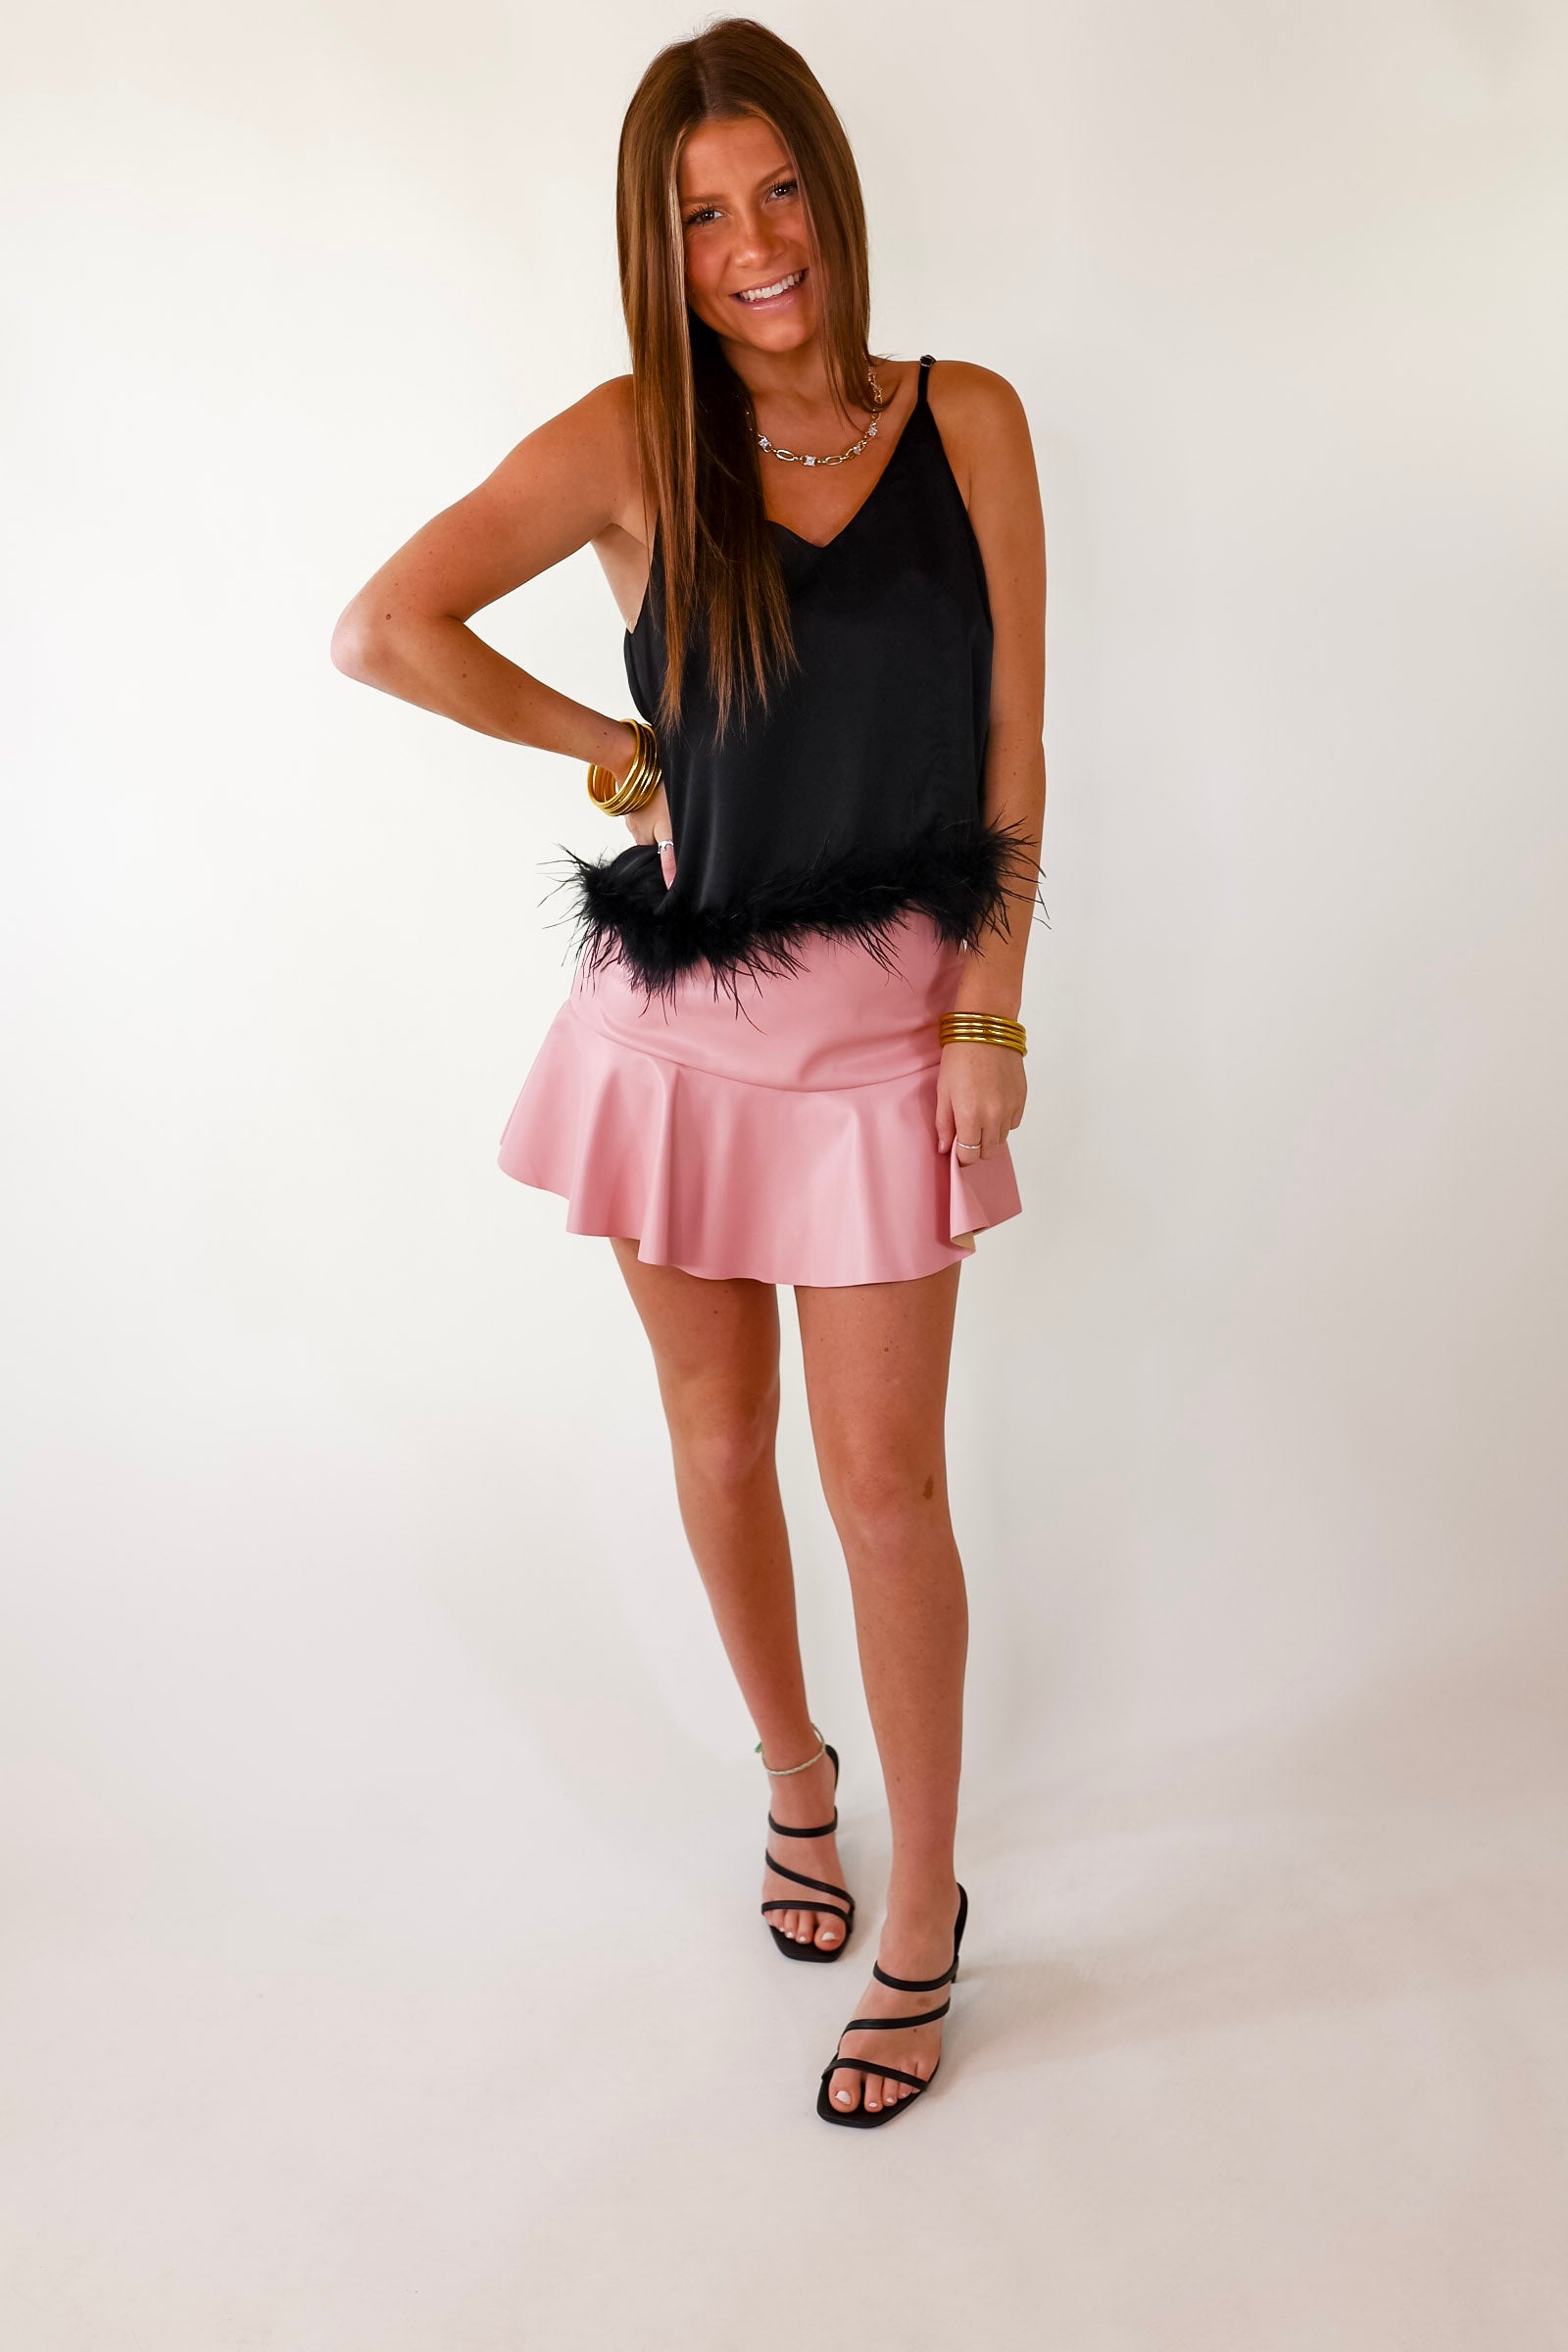 Out All Night Spaghetti Strap Top with Feather Hem in Black - Giddy Up Glamour Boutique